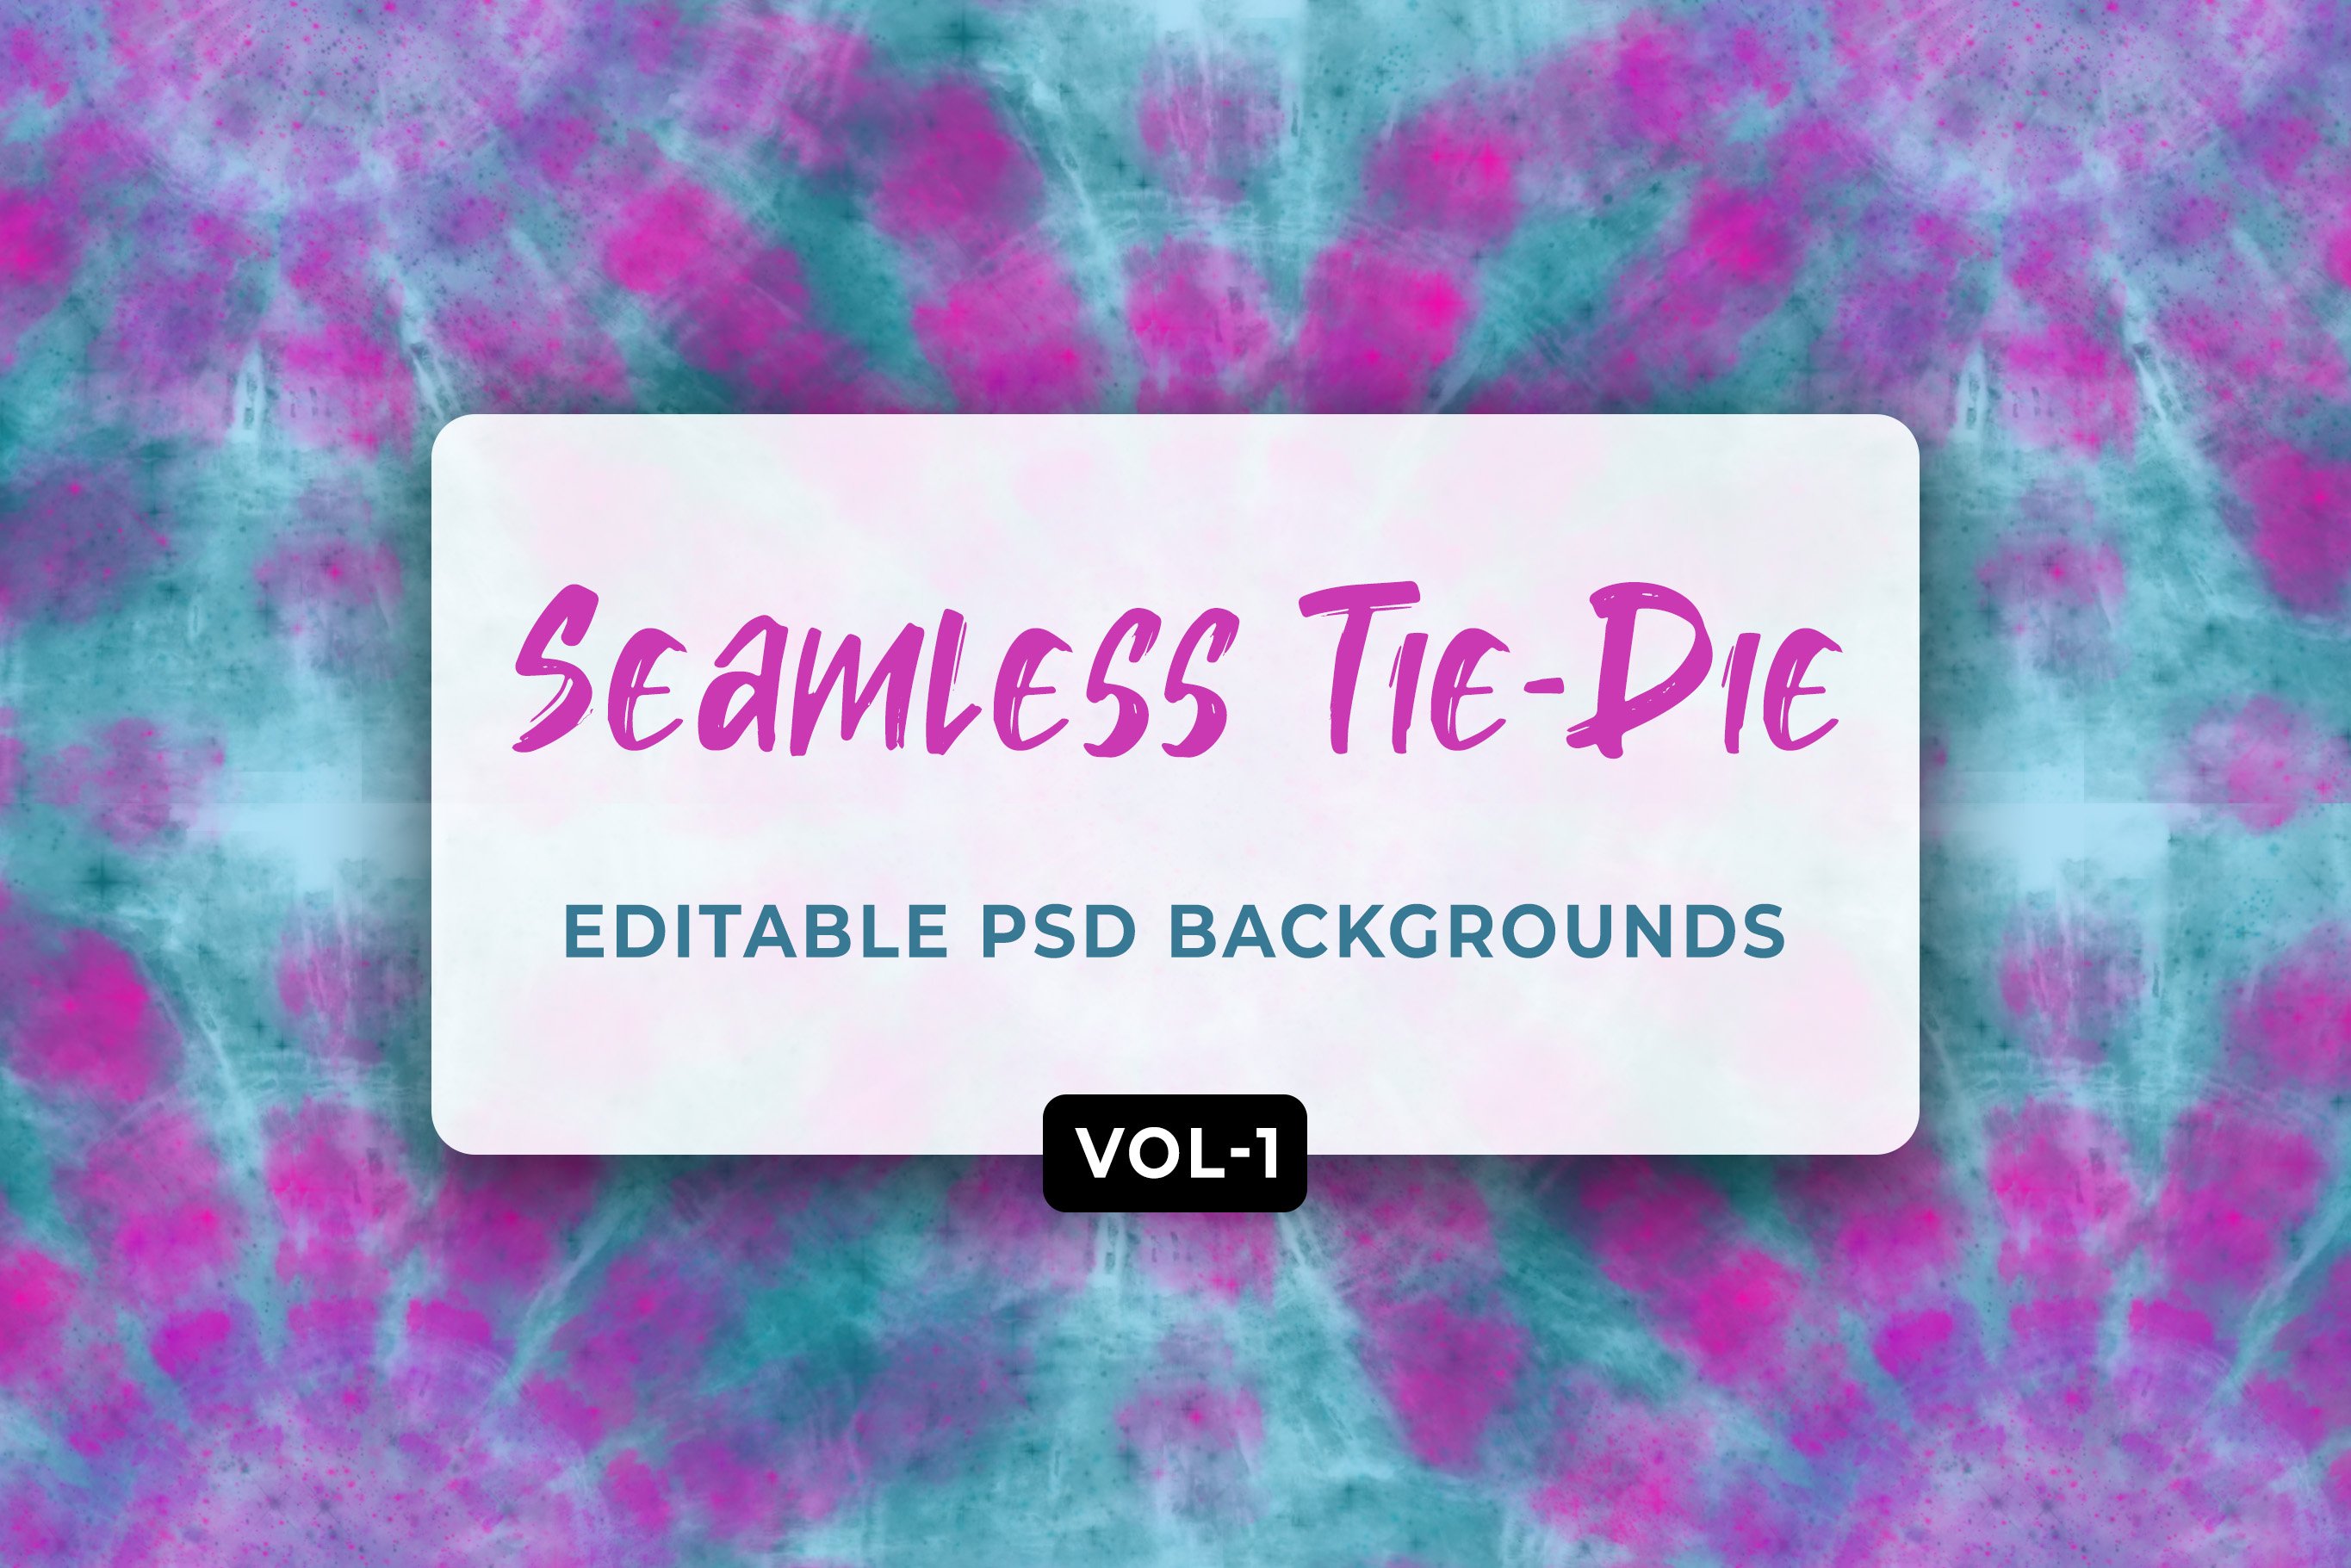 Tie Dye Seamless Patterns Vol- 01 cover image.